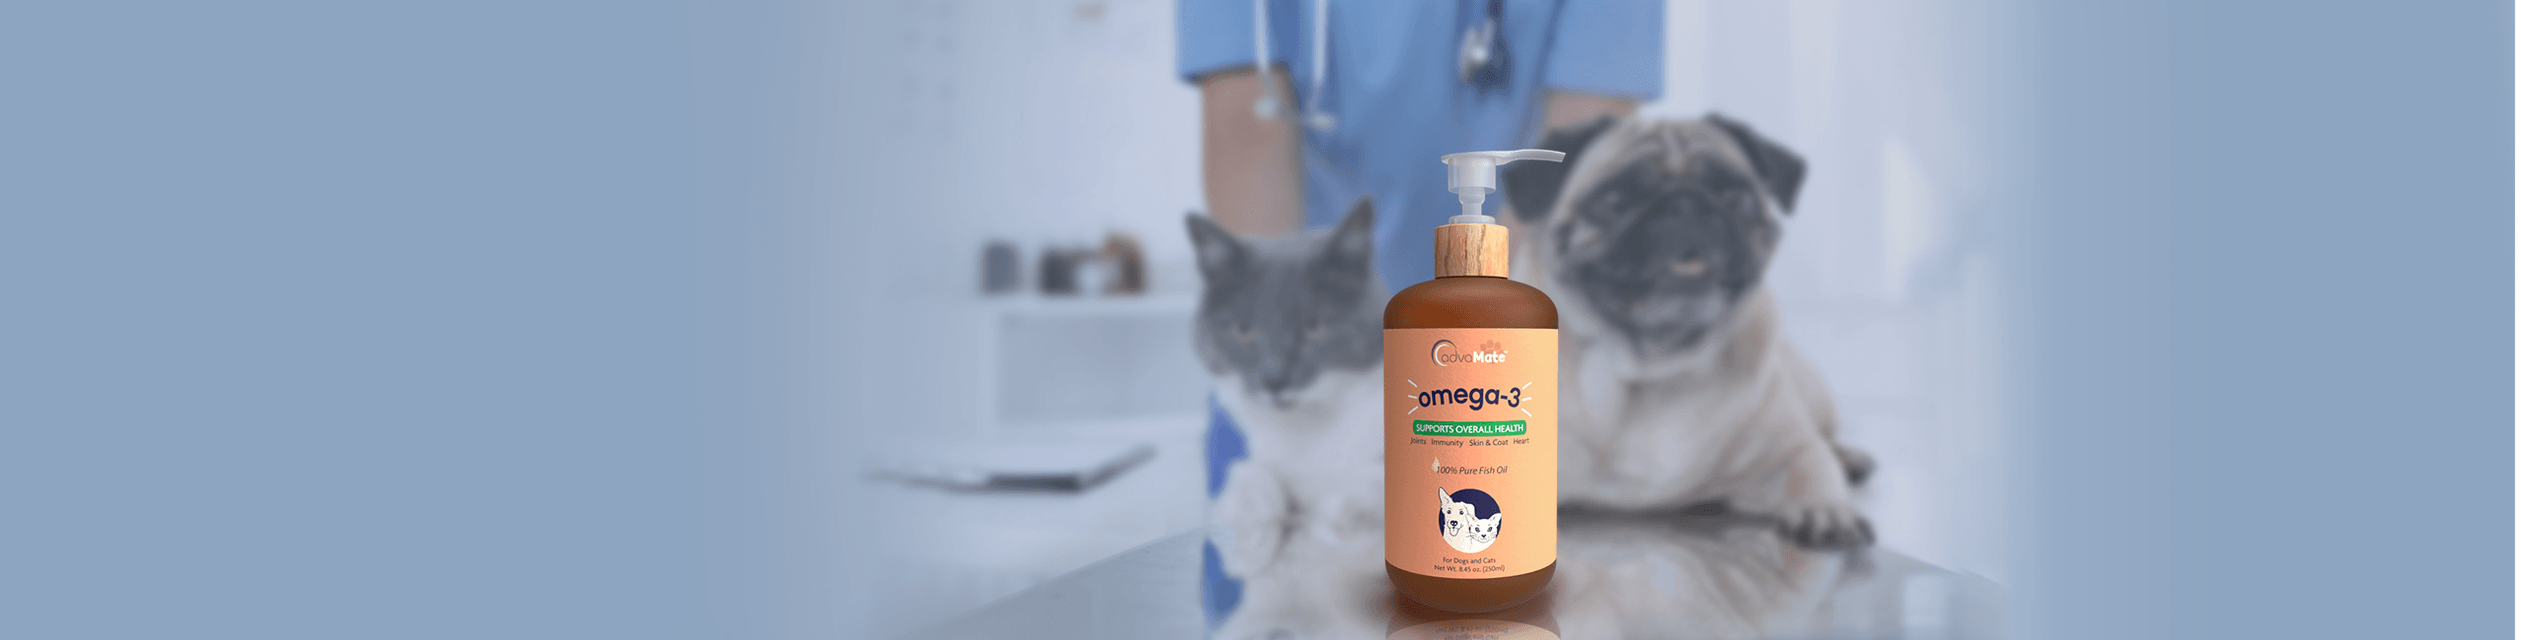 Omega 3 supplement for dogs and cats